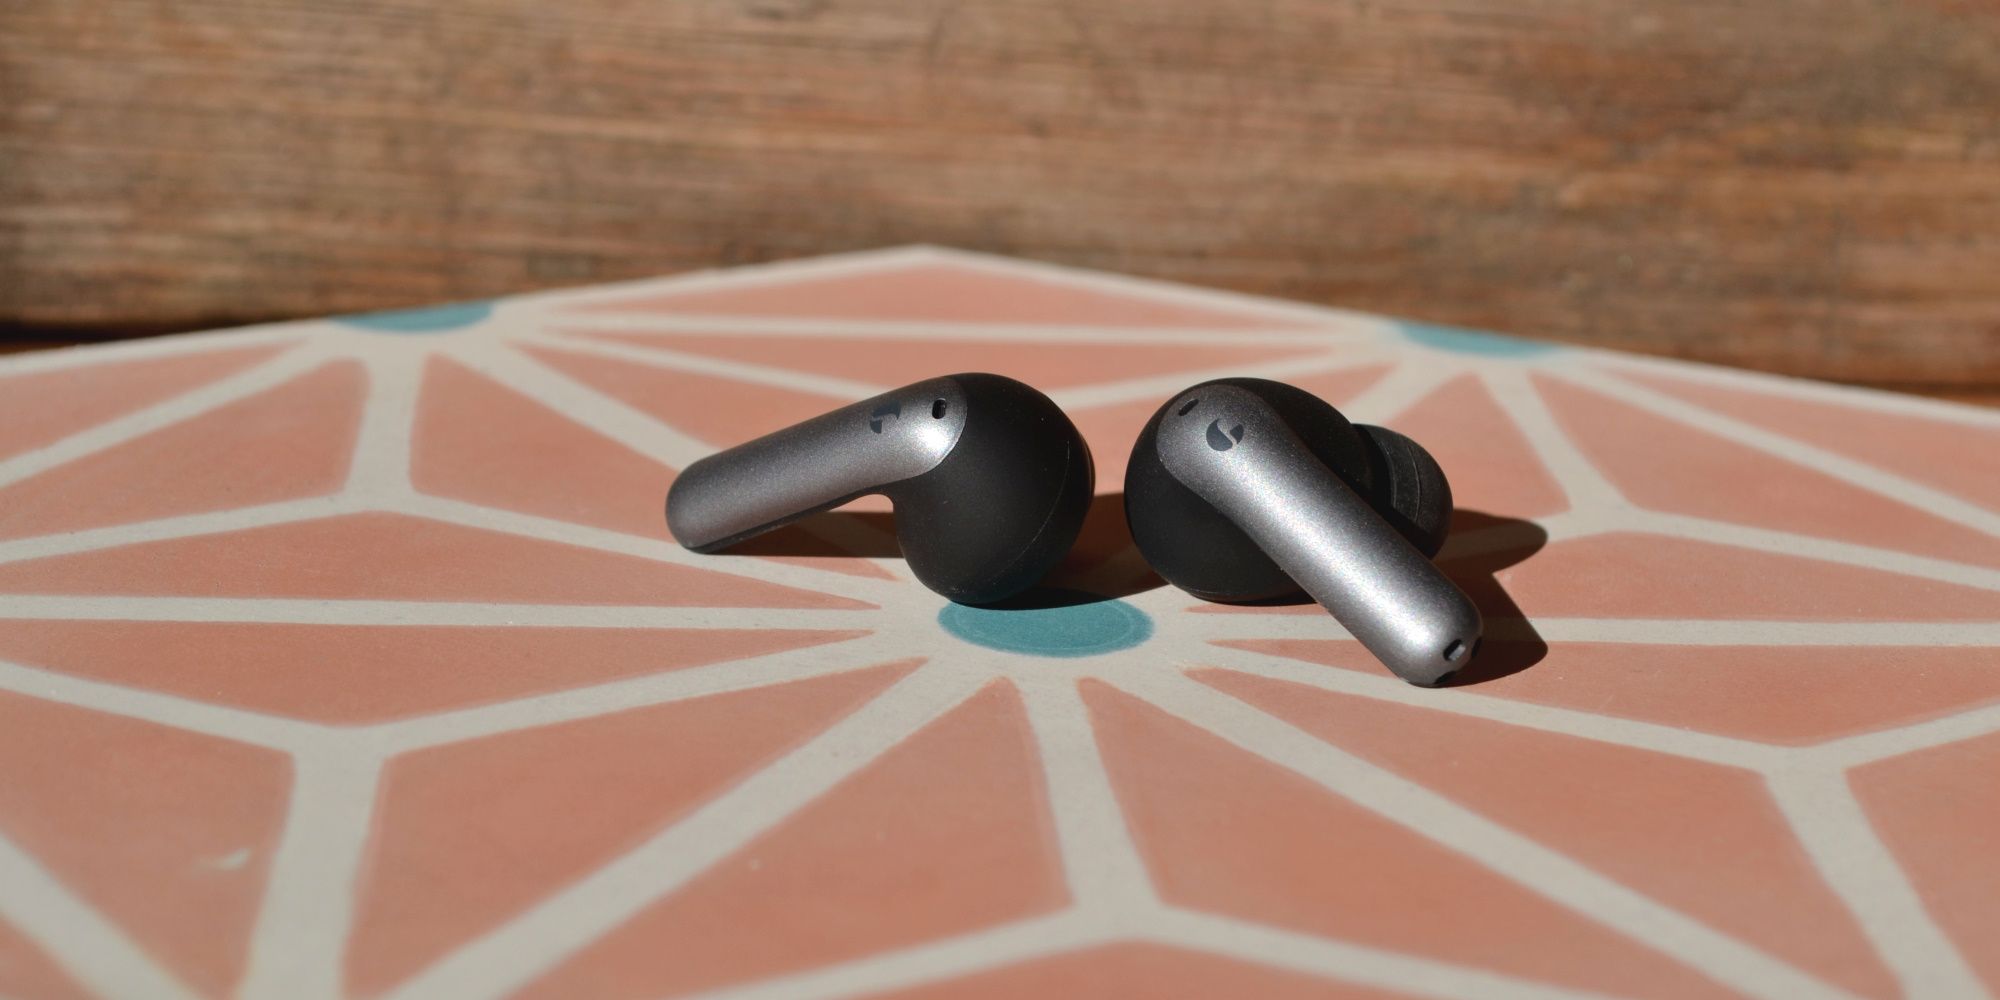 elevoc clear earbuds review buds on tile side